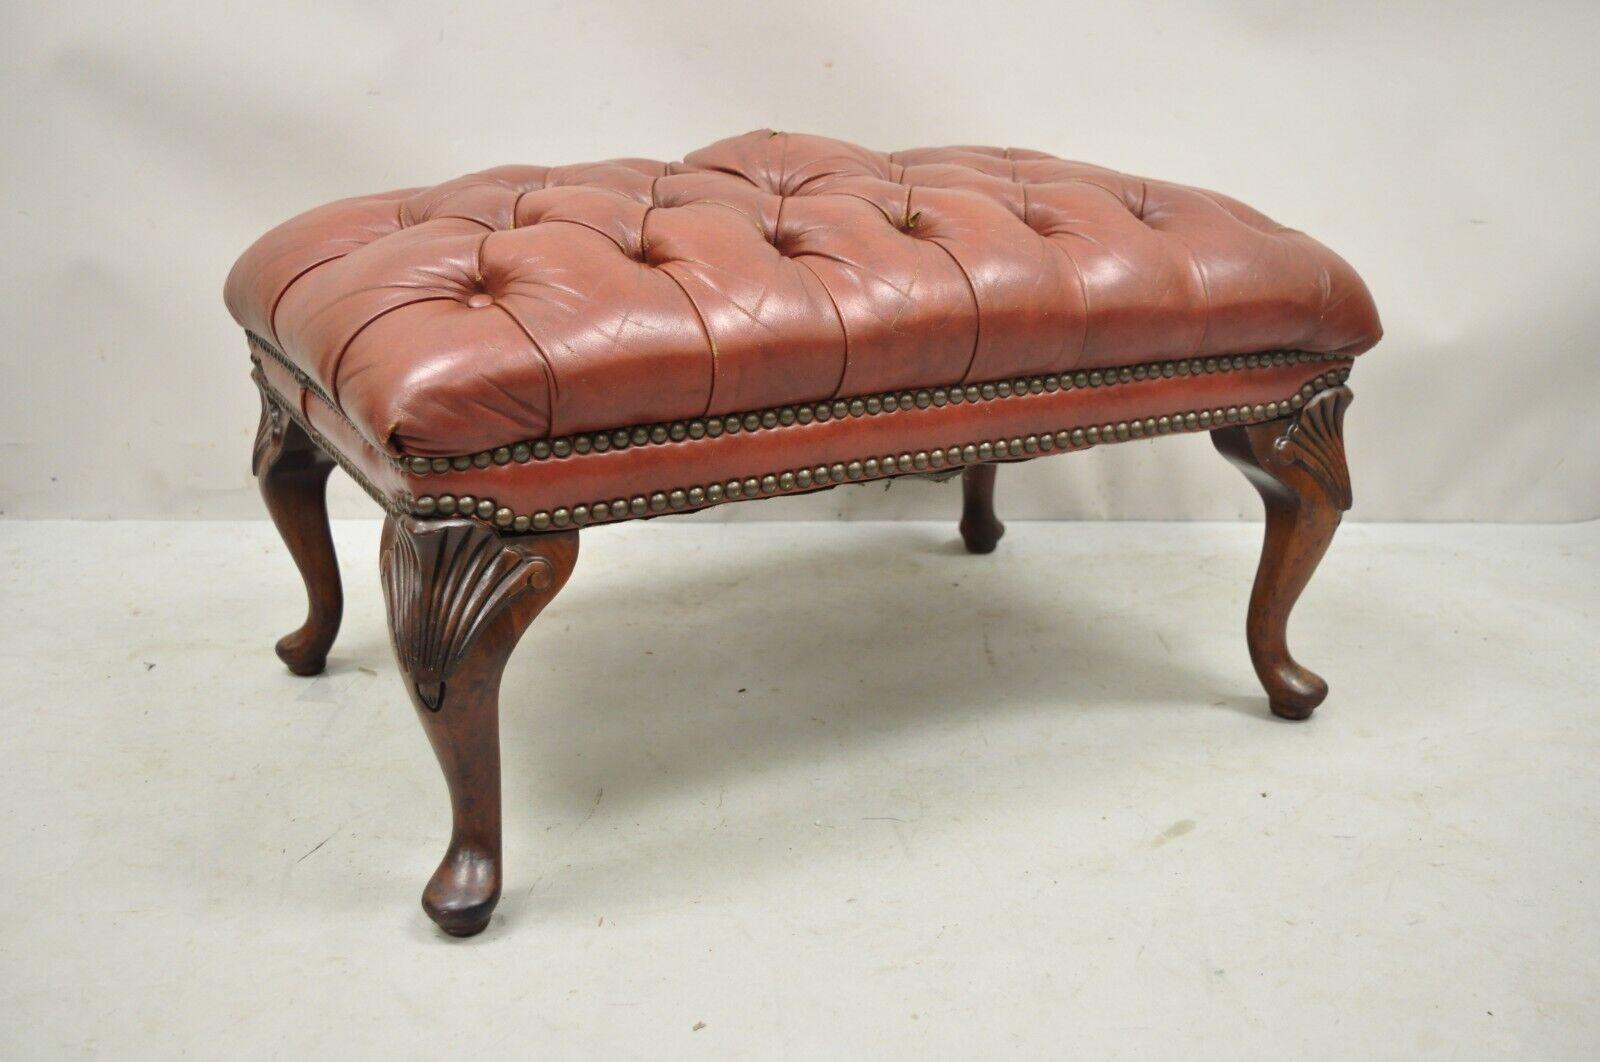 Vintage brown leather English Chesterfield Queen Anne style Tufted Ottoman Footstool. Item features shell carved knees, button tufted brown leather upholstery, solid wood frame, beautiful wood grain, nicely carved details, very nice antique item.